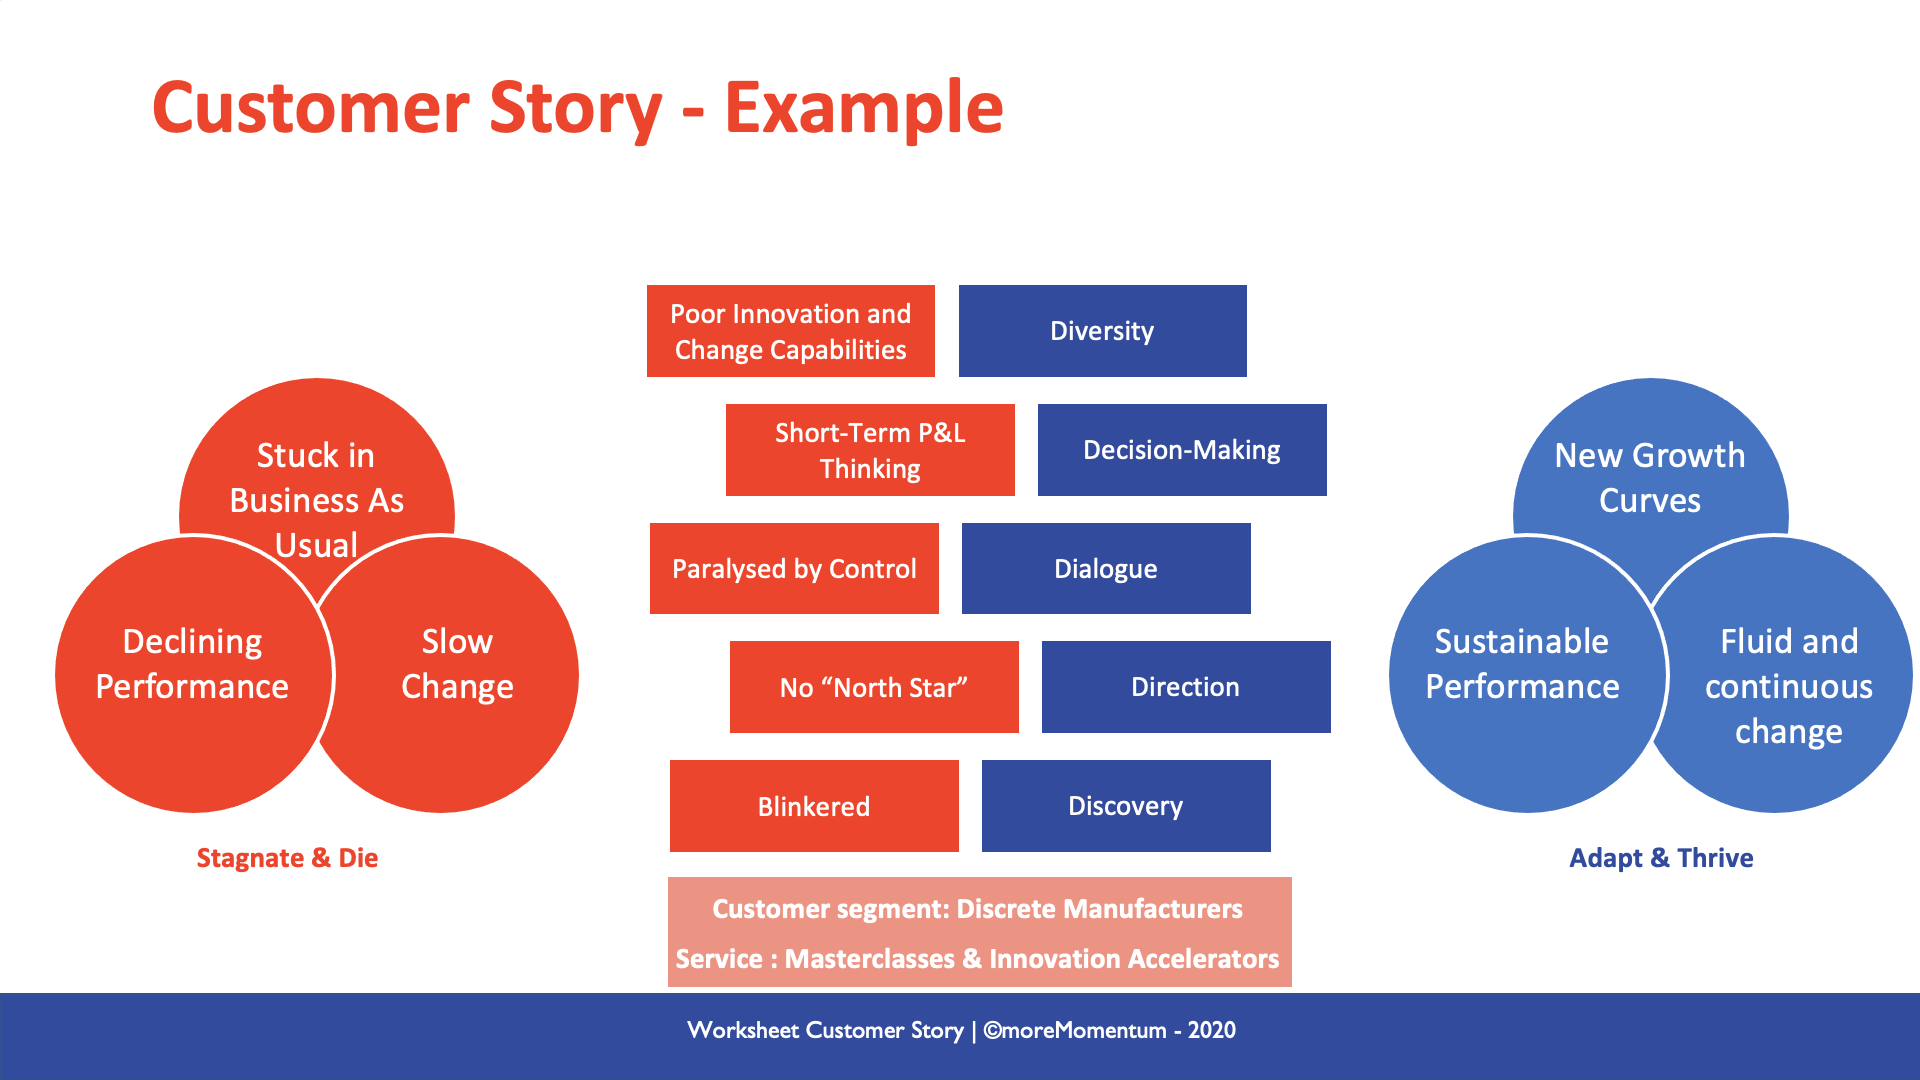 building a strong customer story - an example